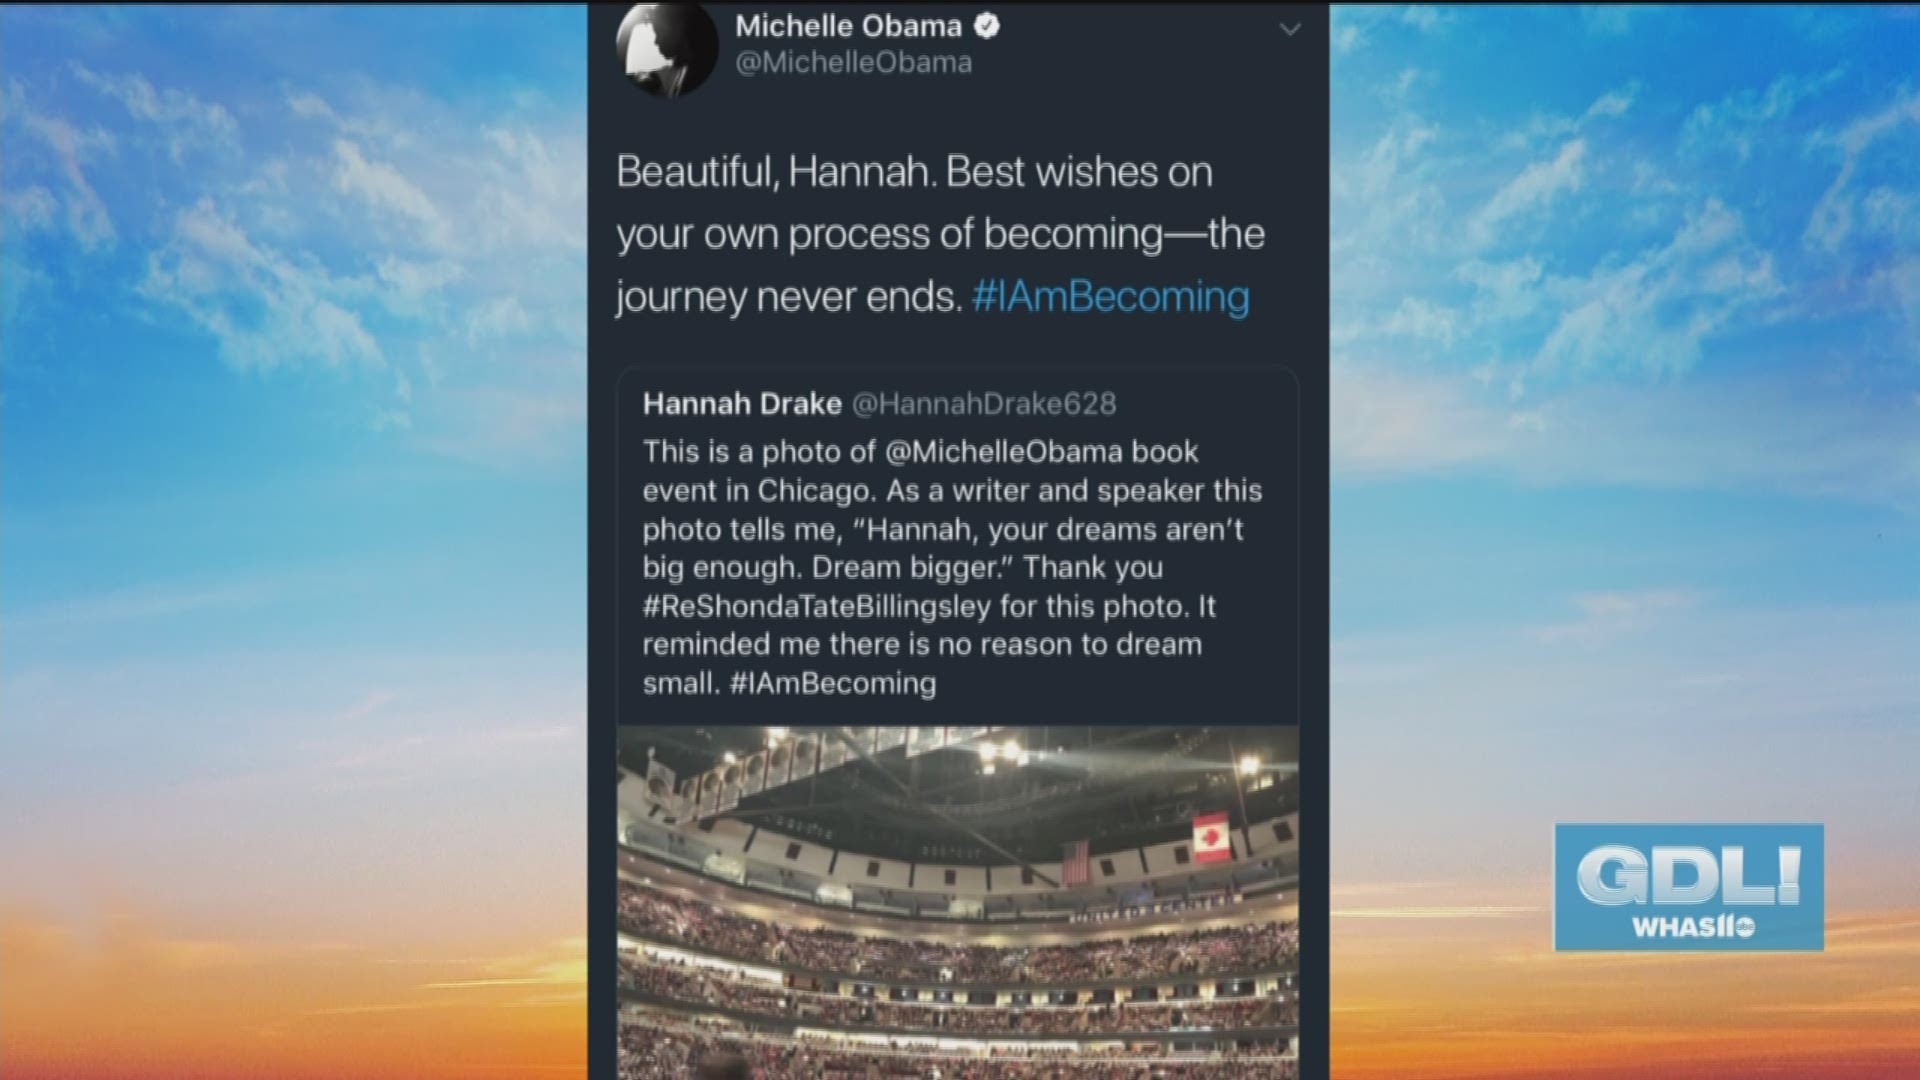 Hannah Drake is an author, spoken word artist and she was recently retweeted by former first lady Michelle Obama. For more on Hannah Drake, you can check her out online at HannahLDrake.com or follow her on Twitter @HannahDrake628.